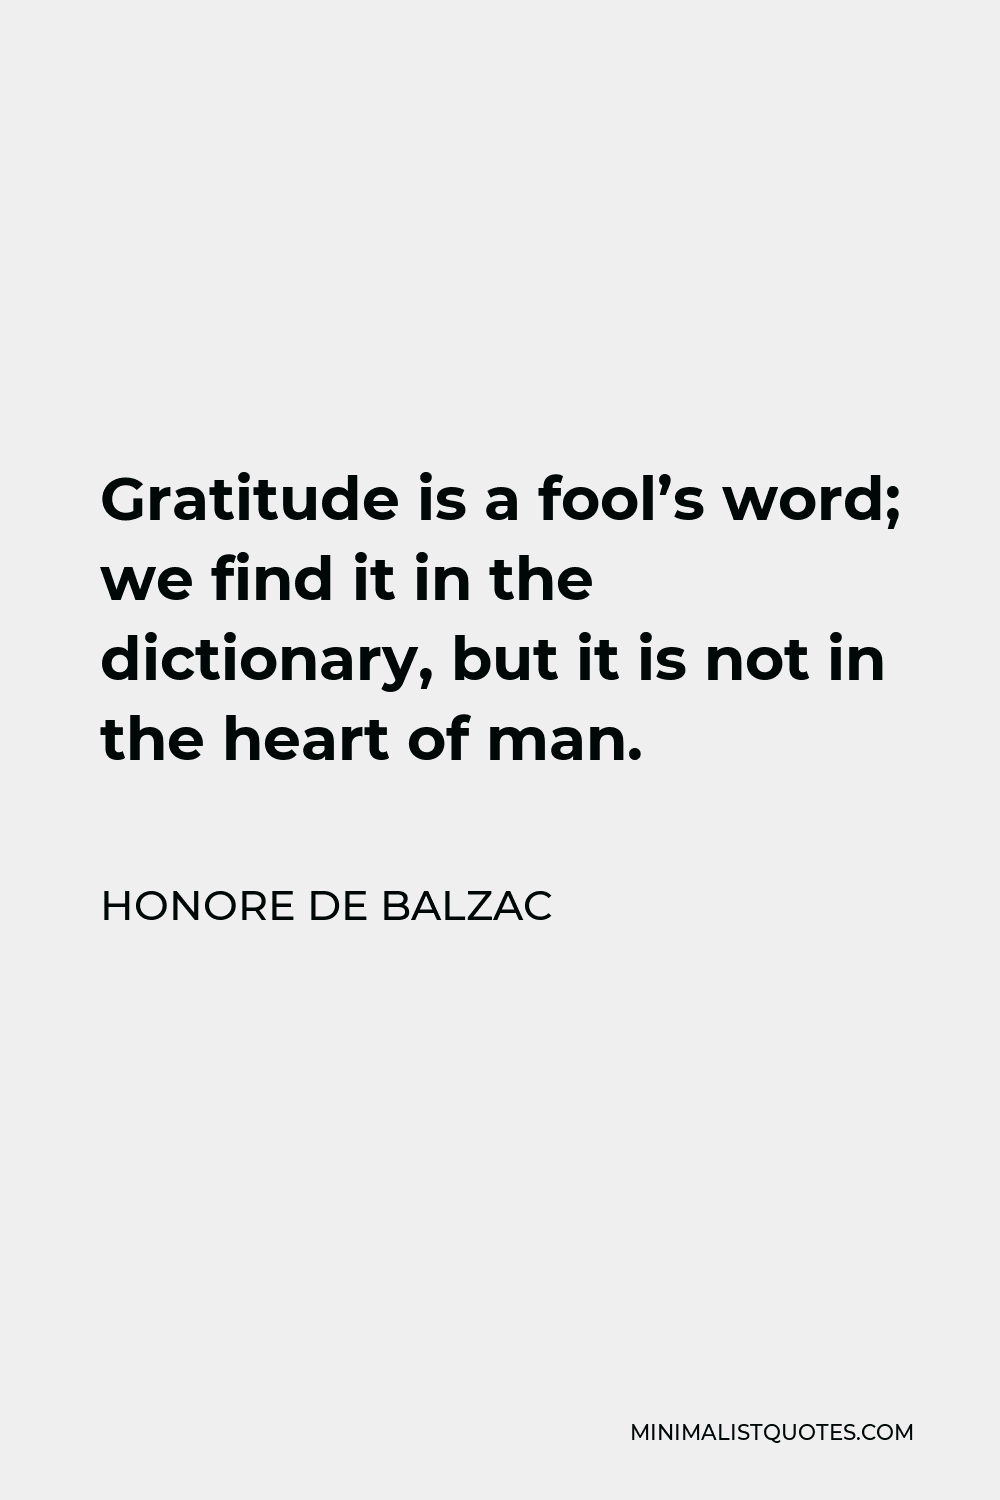 Honore de Balzac Quote - Gratitude is a fool’s word; we find it in the dictionary, but it is not in the heart of man.